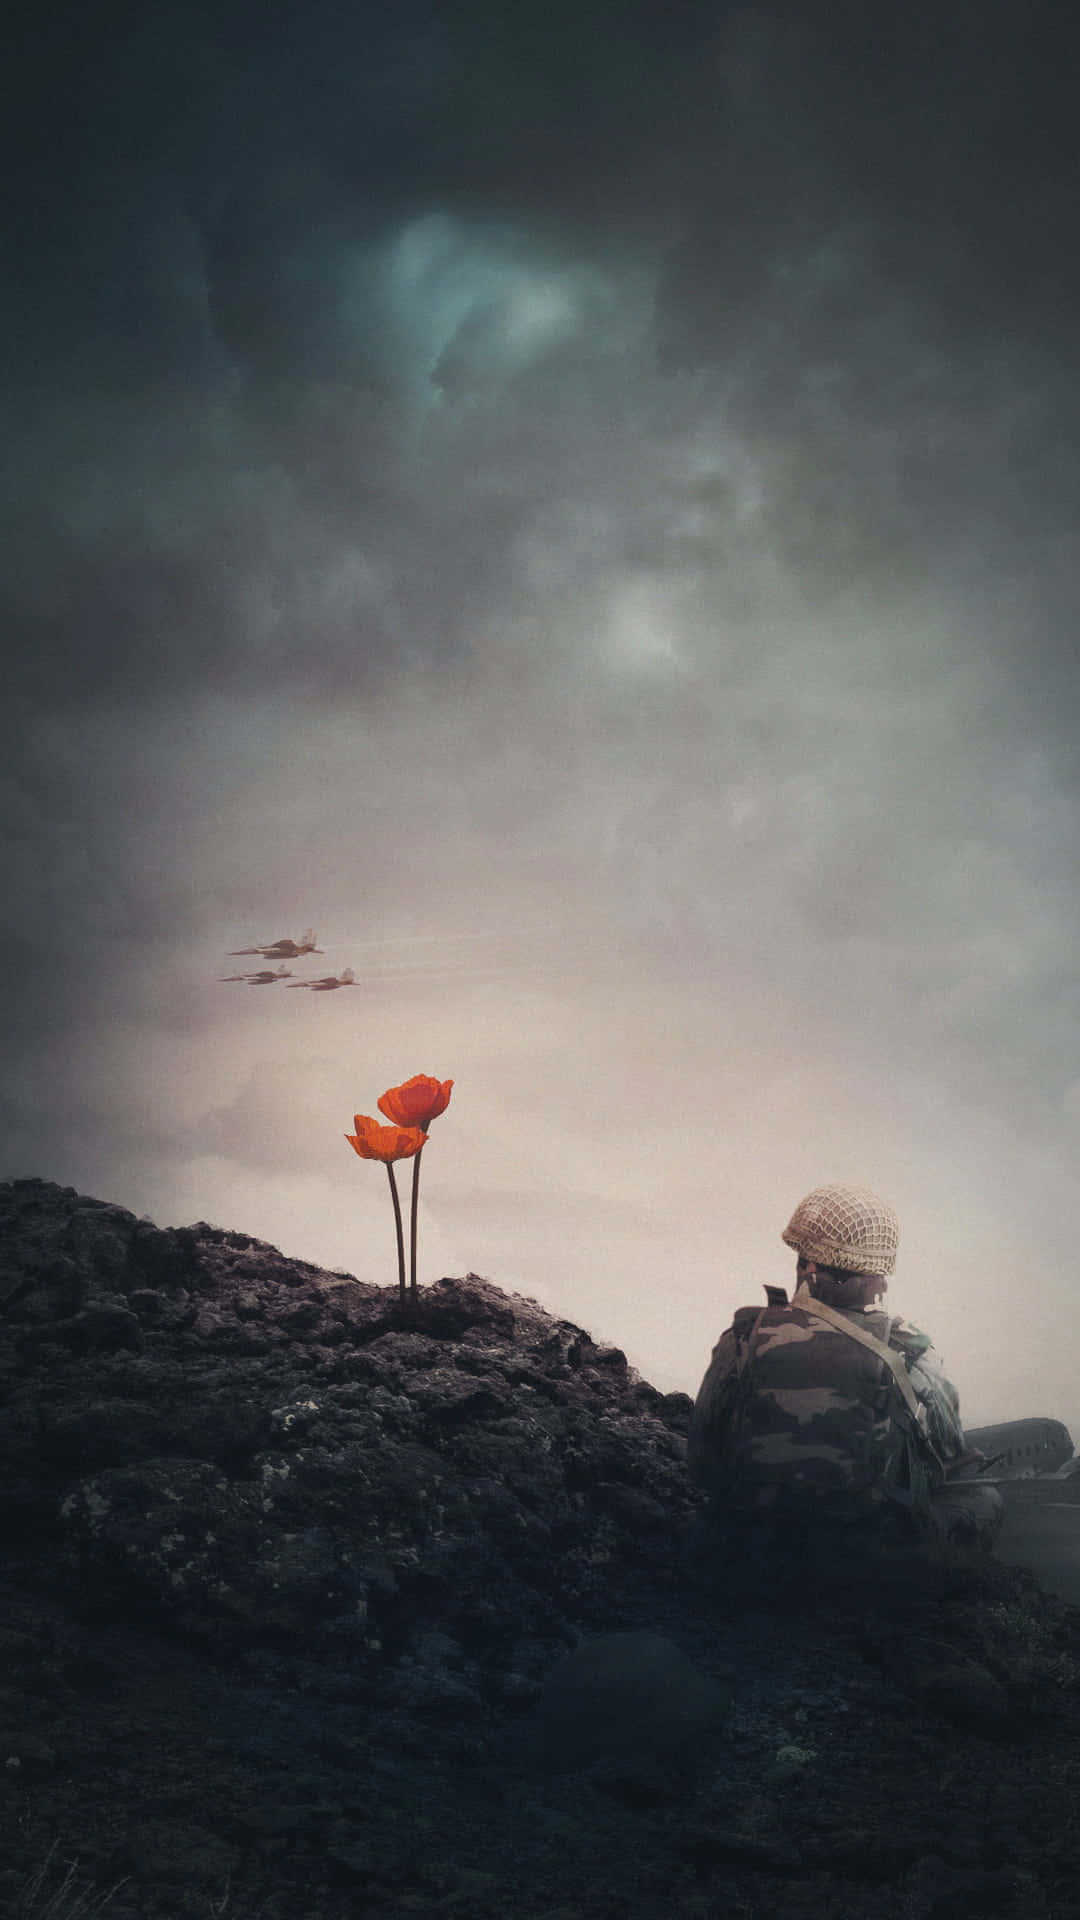 A Soldier Is Sitting On A Rock With A Poppy Flower